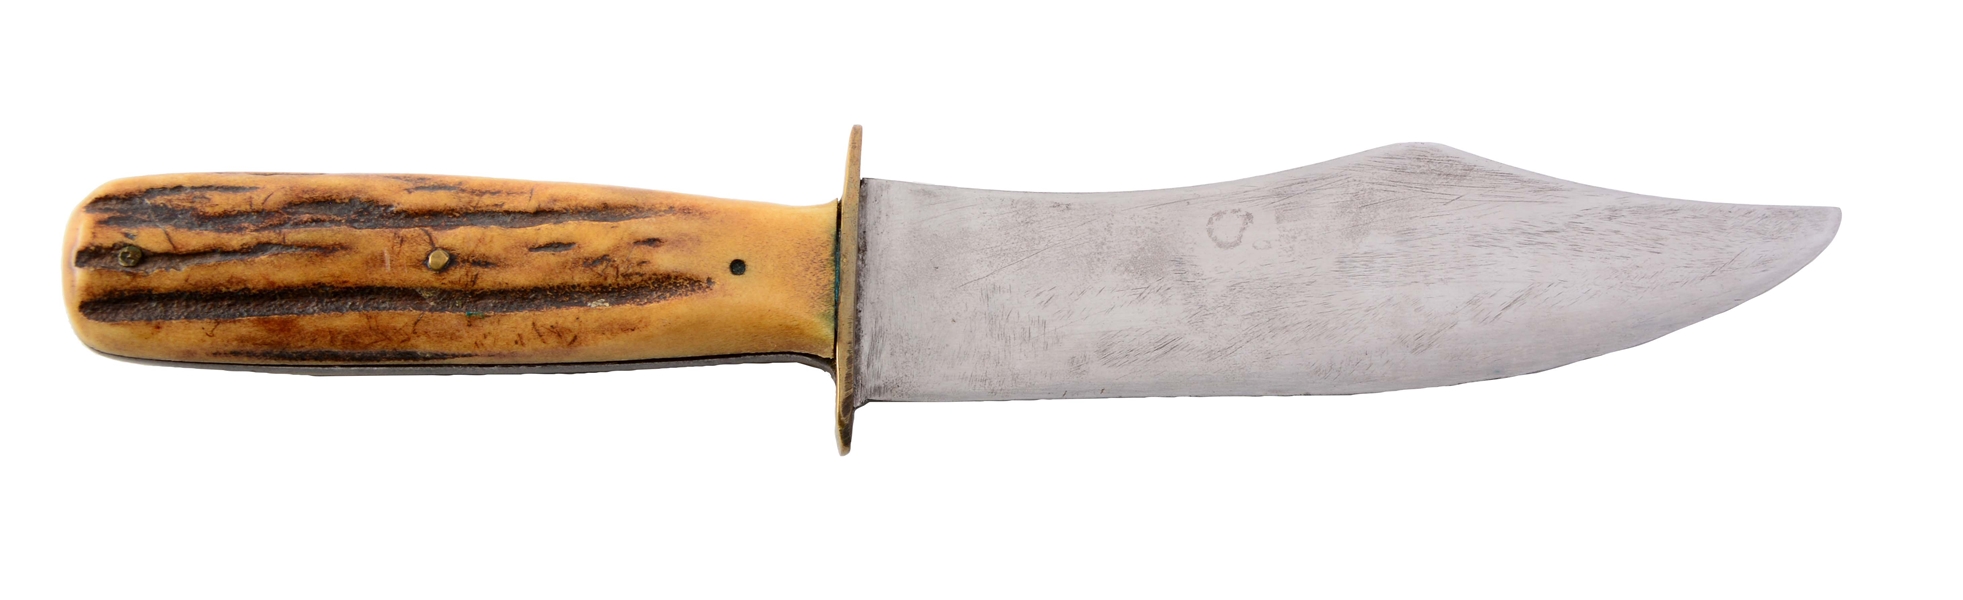 M.S.A. CO. GLADSTONE "HAINES" FIXED BLADE KNIFE.